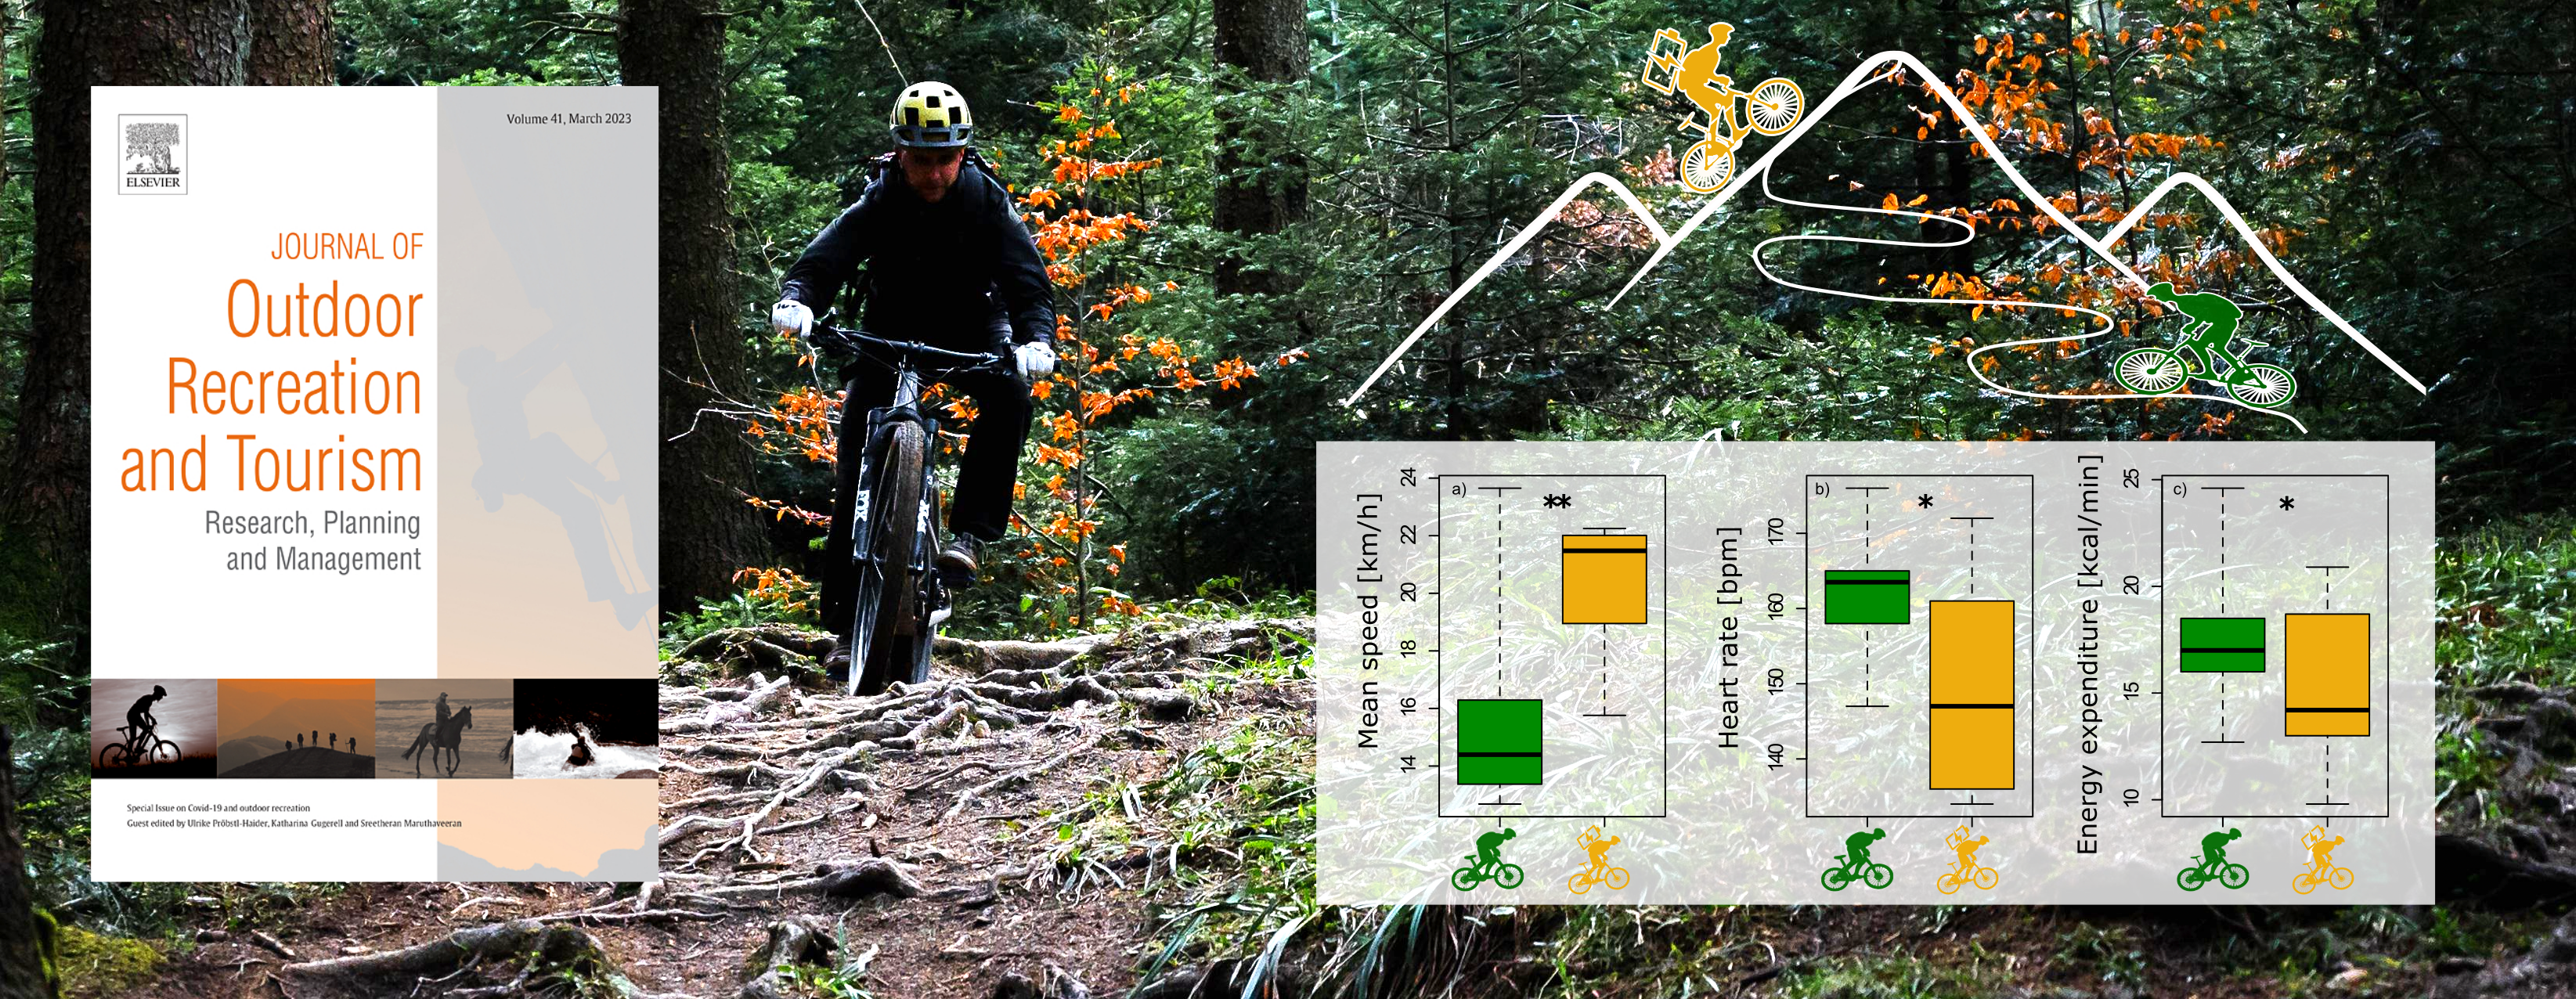 Electrically assisted mountain biking: Riding faster, higher, farther in natural mountain systems